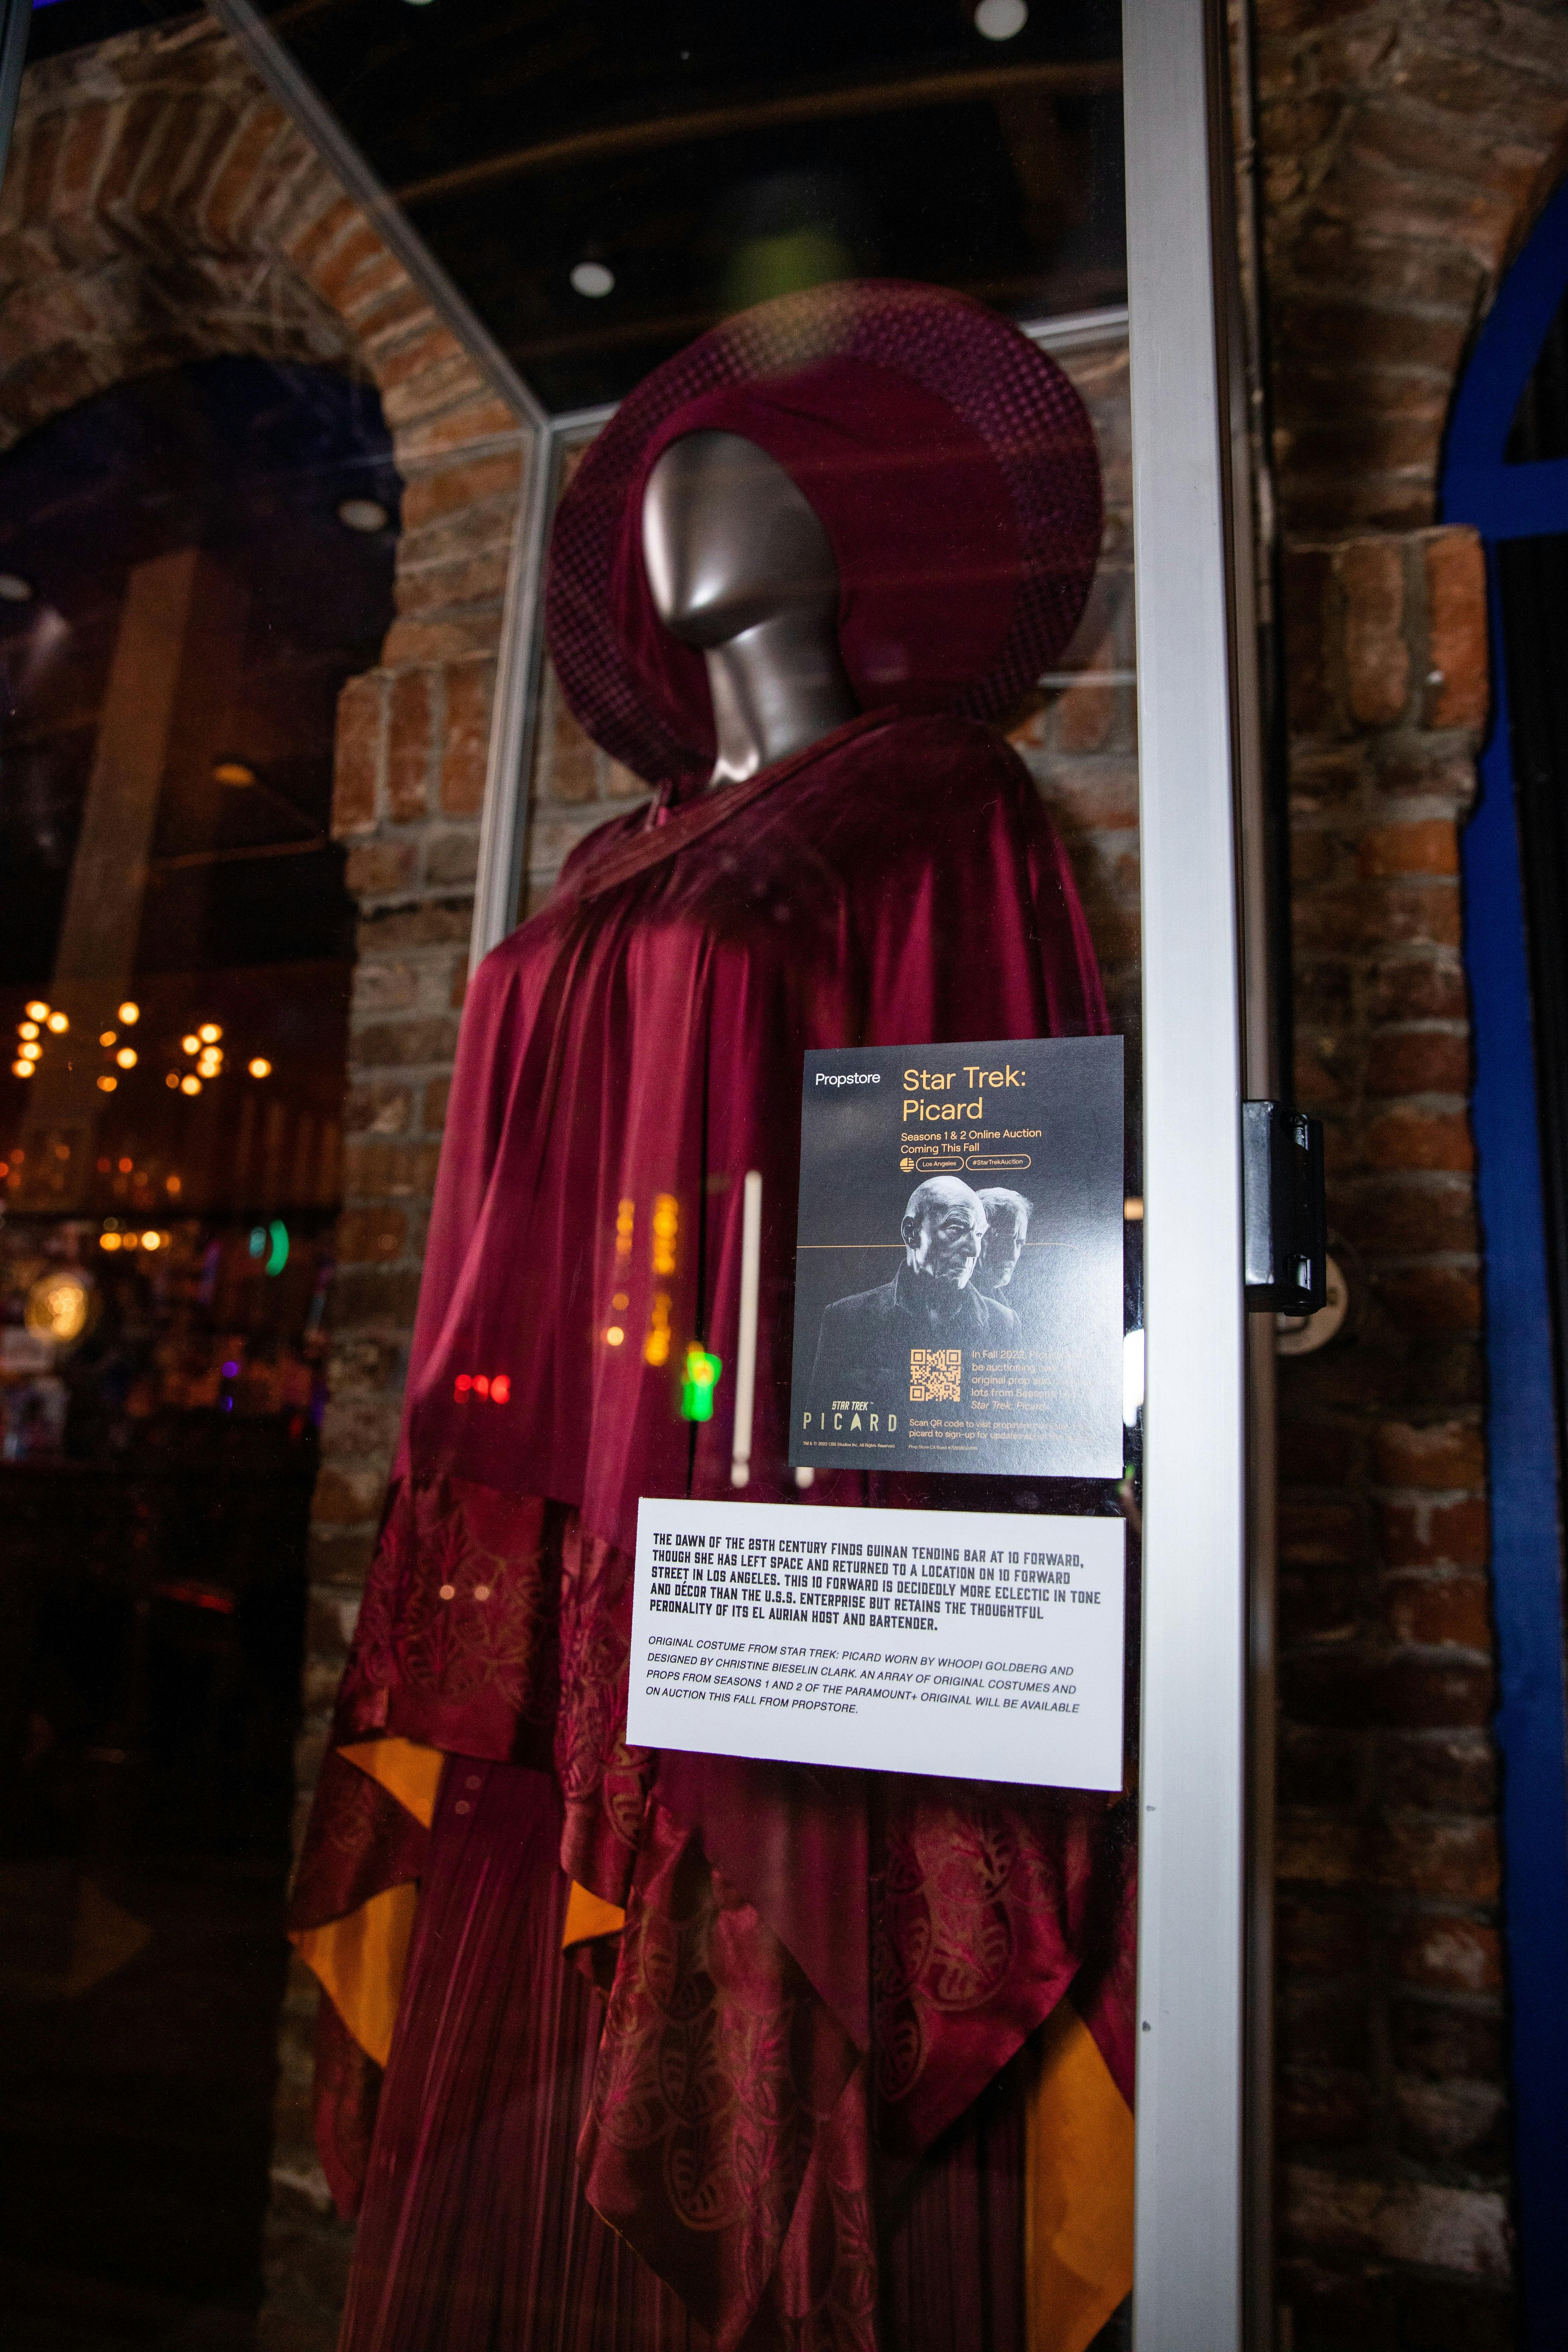 One of Guinan's costumes from Star Trek: Picard.